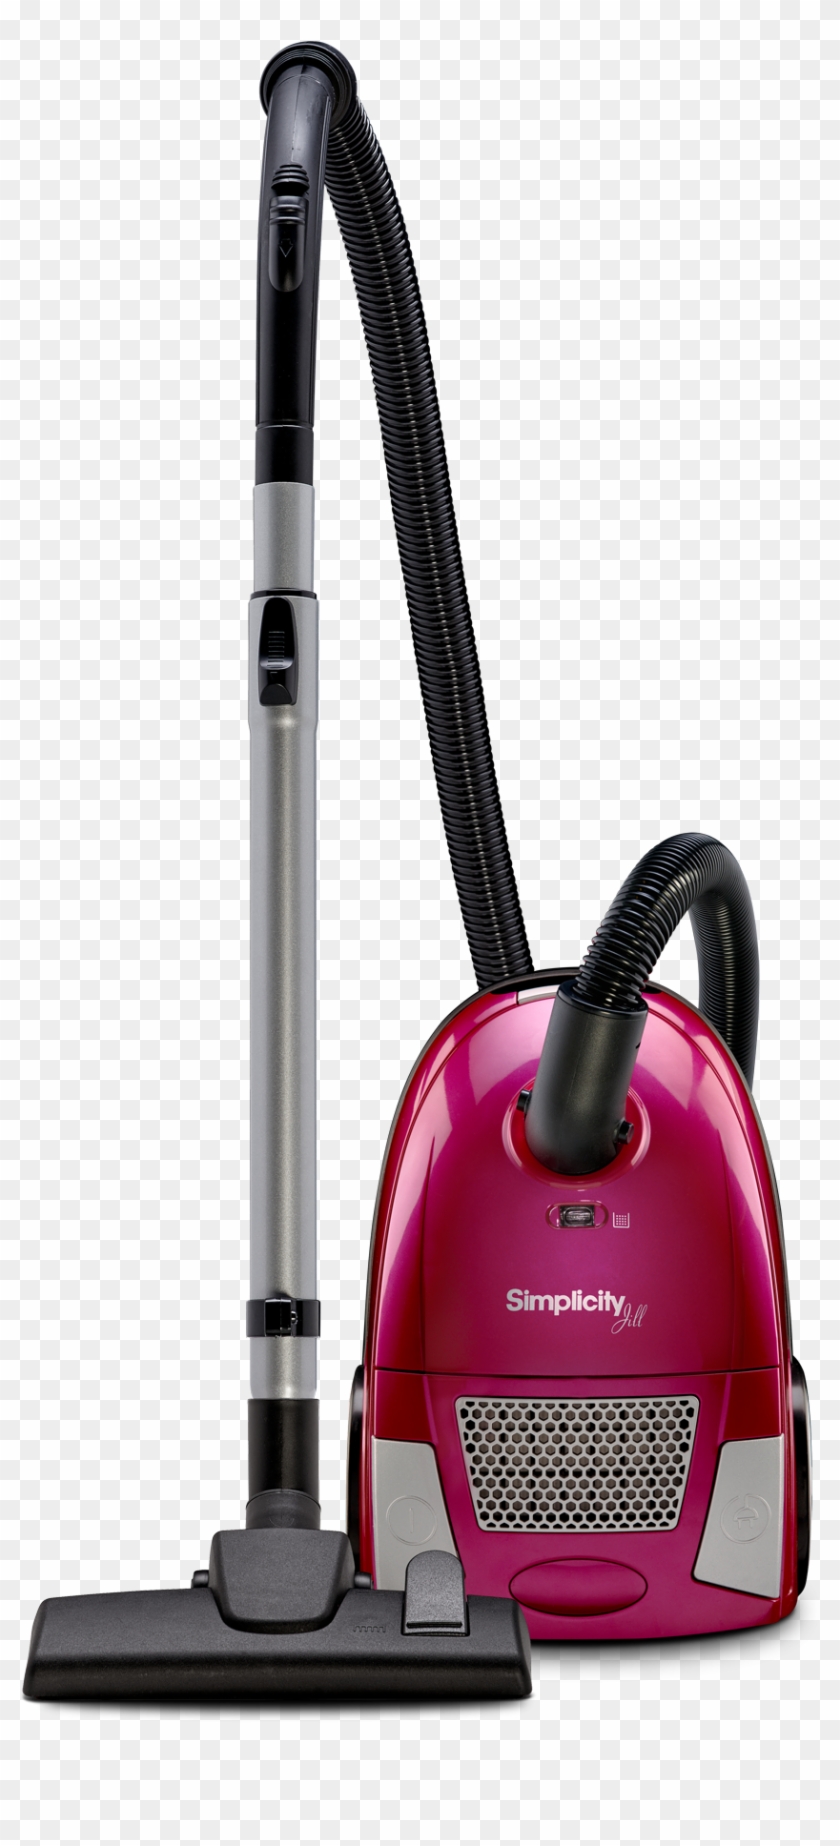 Jill Compact Canister Vacuum Cleaner Rh Simplicityvac - Simplicity Vacuums #1746699